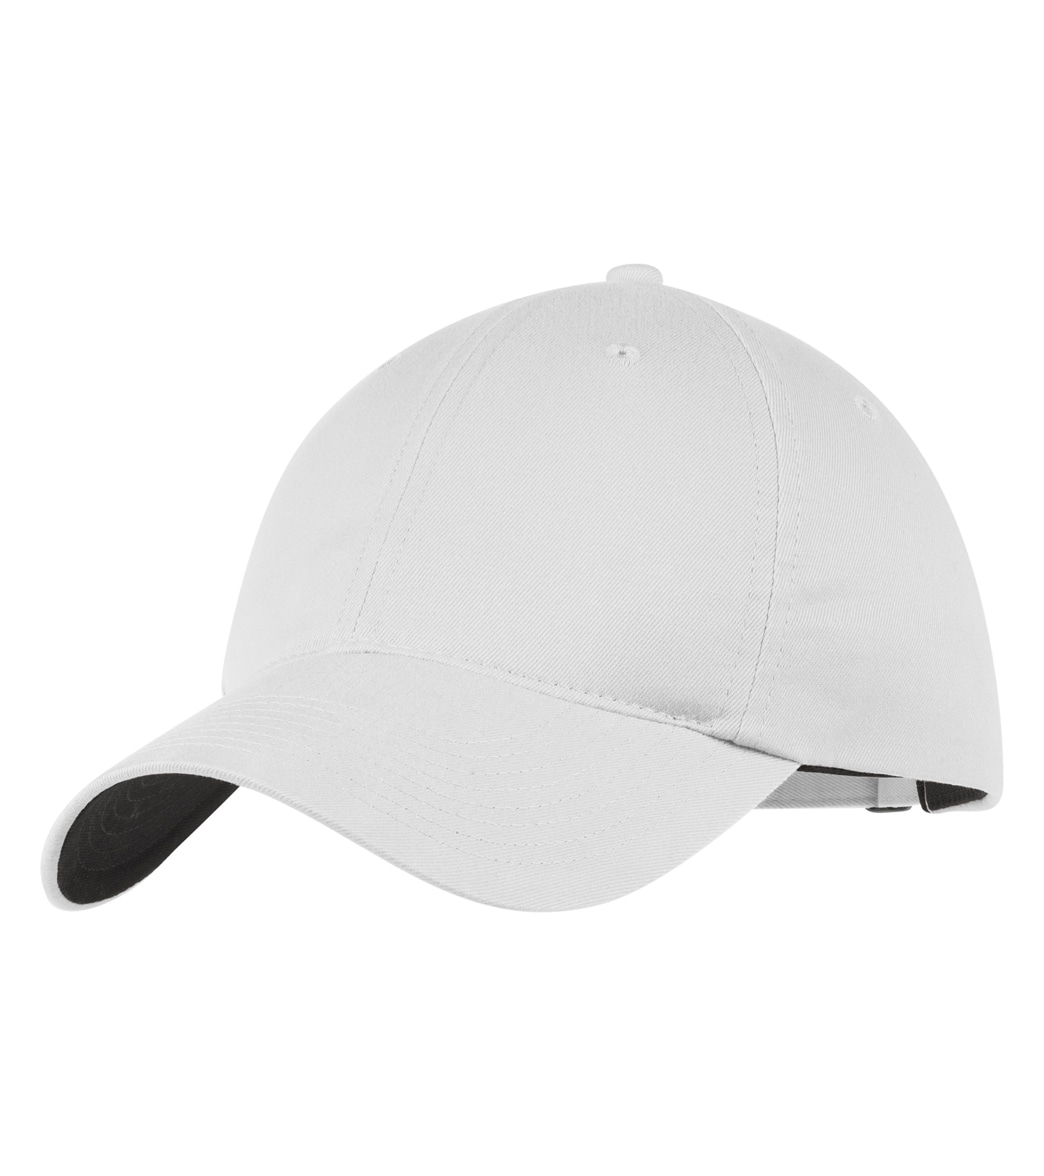 Nike Unstructured Twill Hat - True White One Size Cotton - Swimoutlet.com